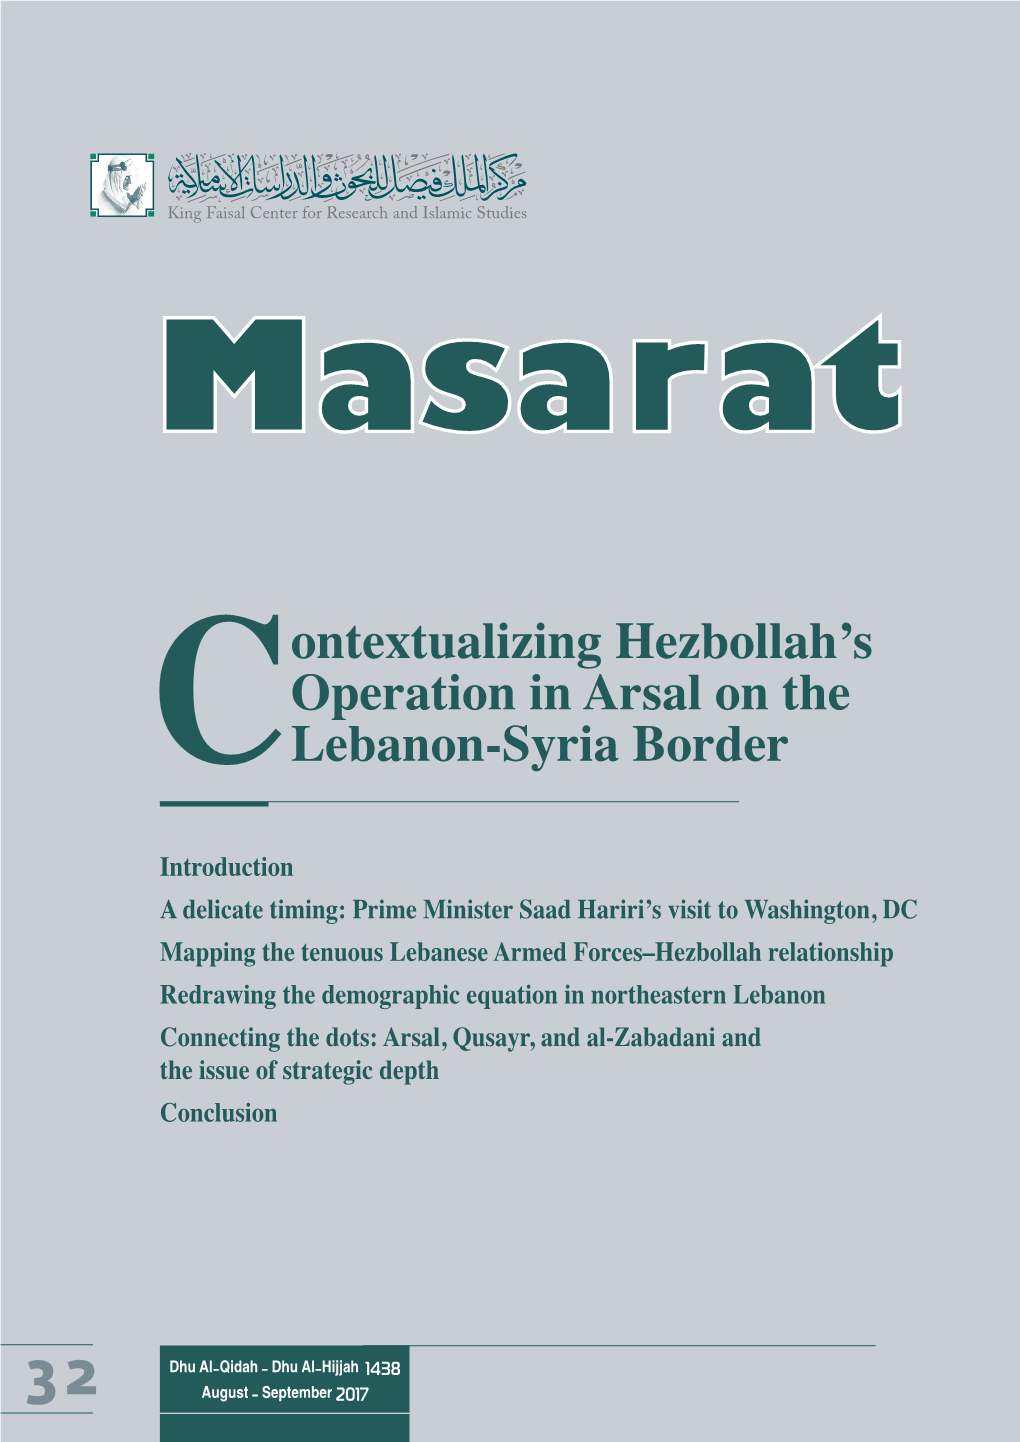 Contextualizing Hezbollah's Operation in Arsal on the Lebanon-Syria Border